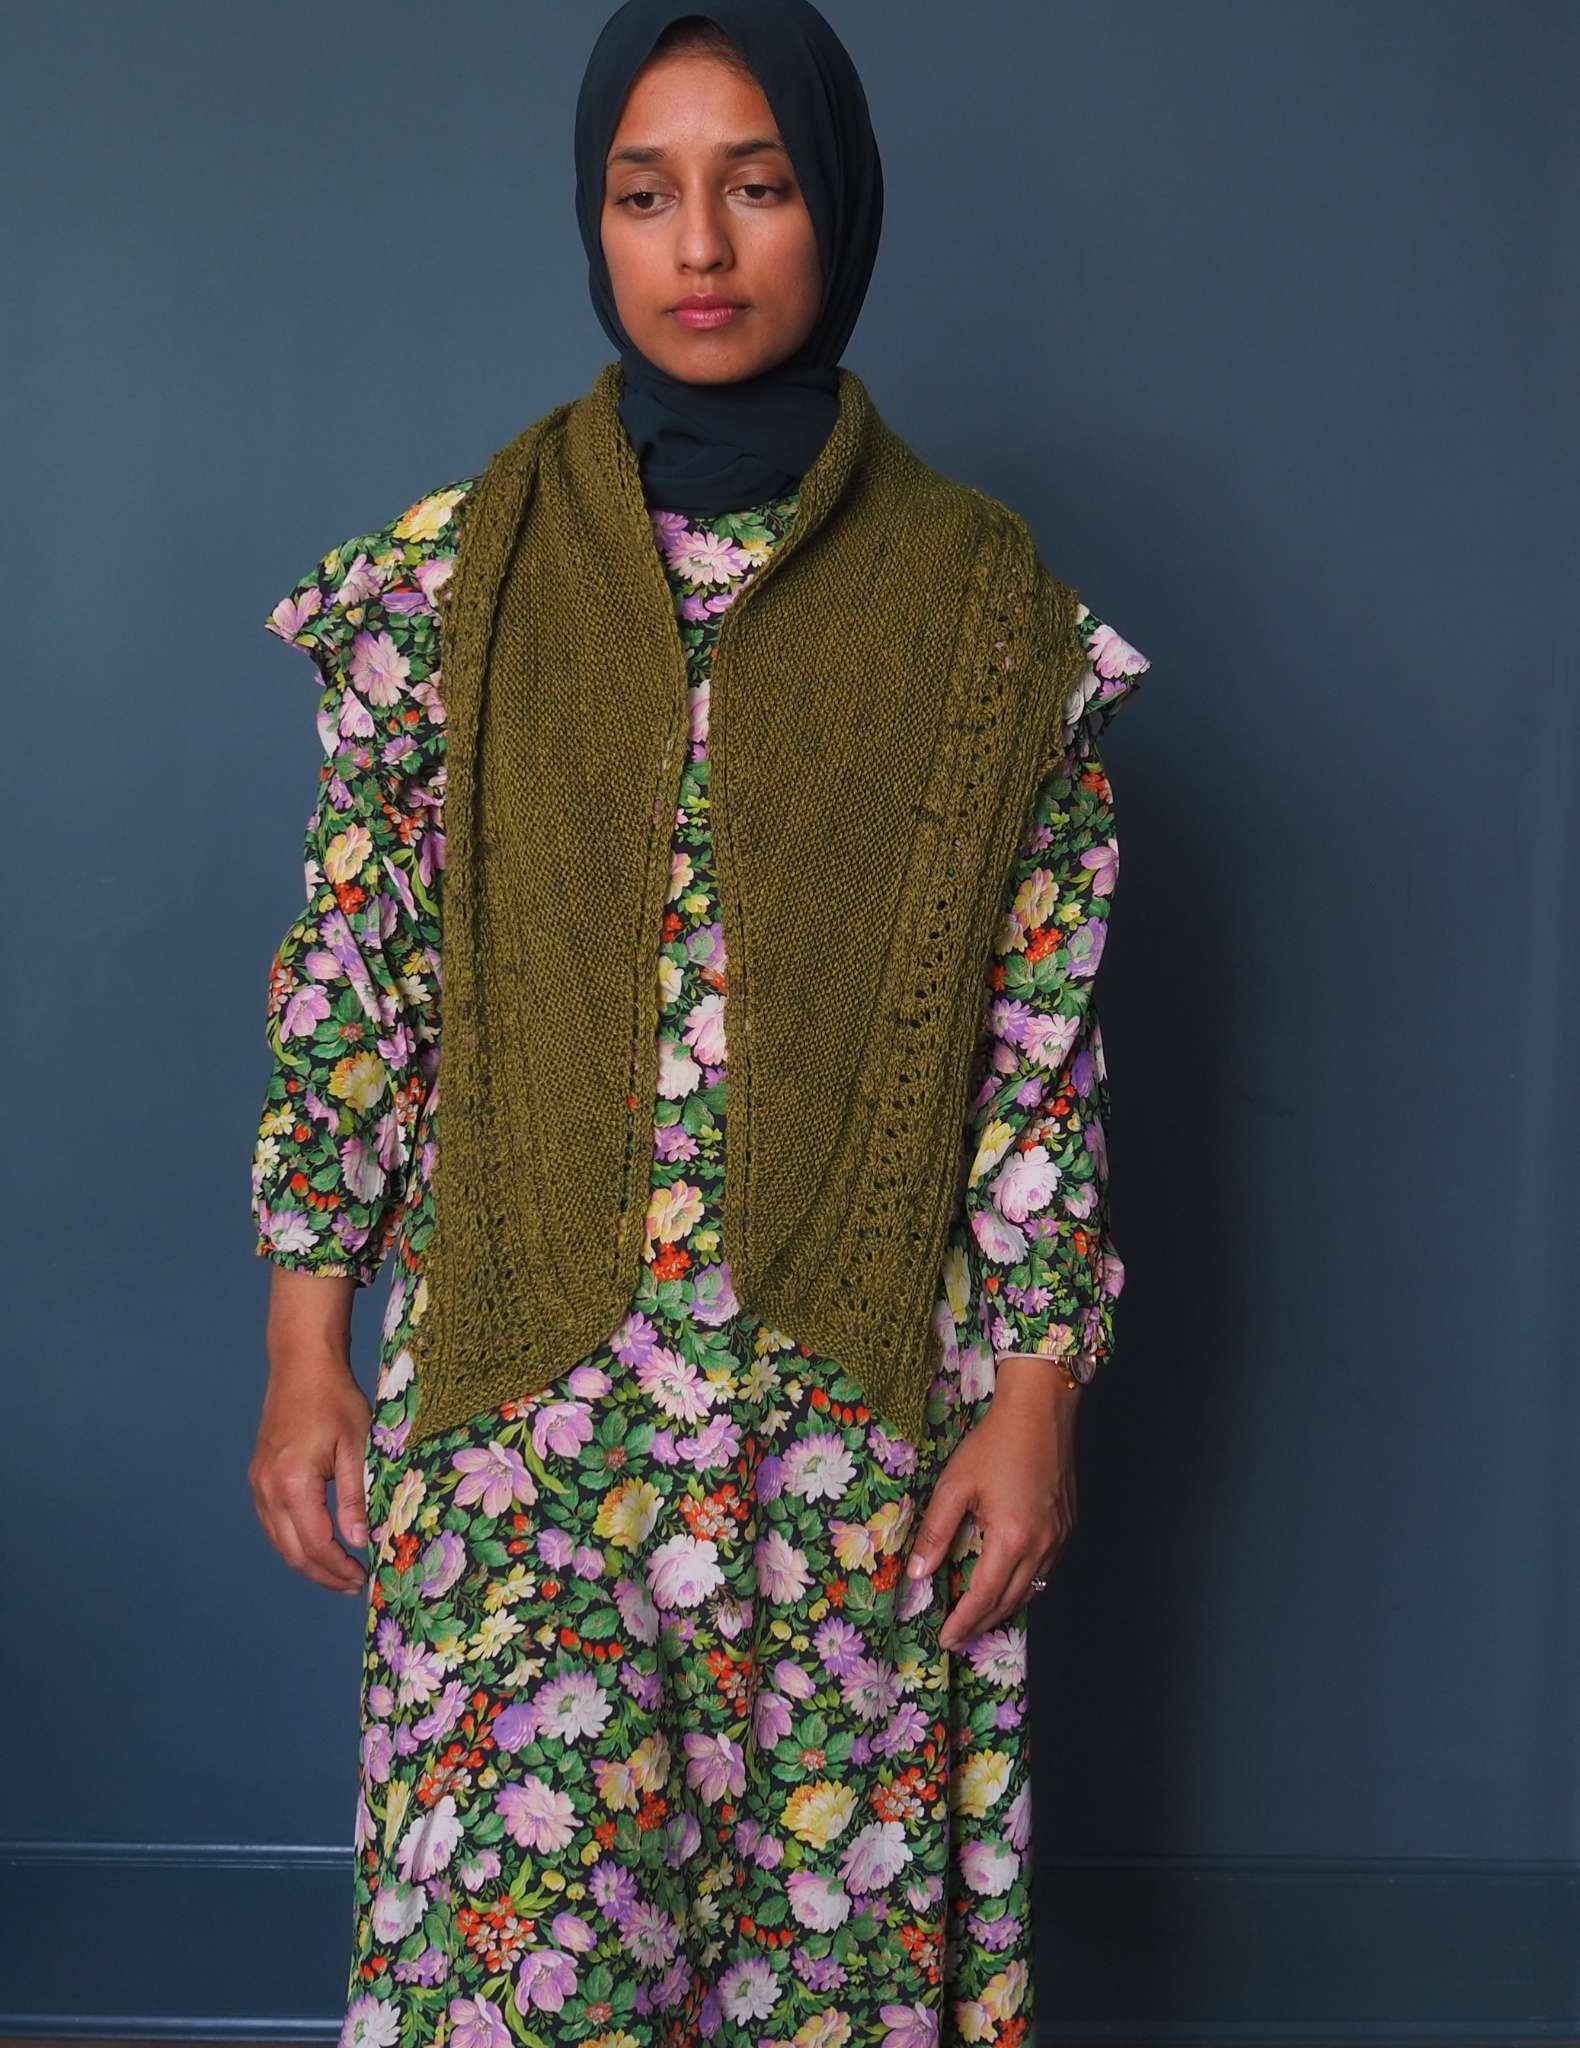 A brown woman in a hijab stands in front of a dark blue background. She is wearing a floral dress in shades of green, pink and yellow and a long green shawl is draped around her neck with the ends pointing down at the front.